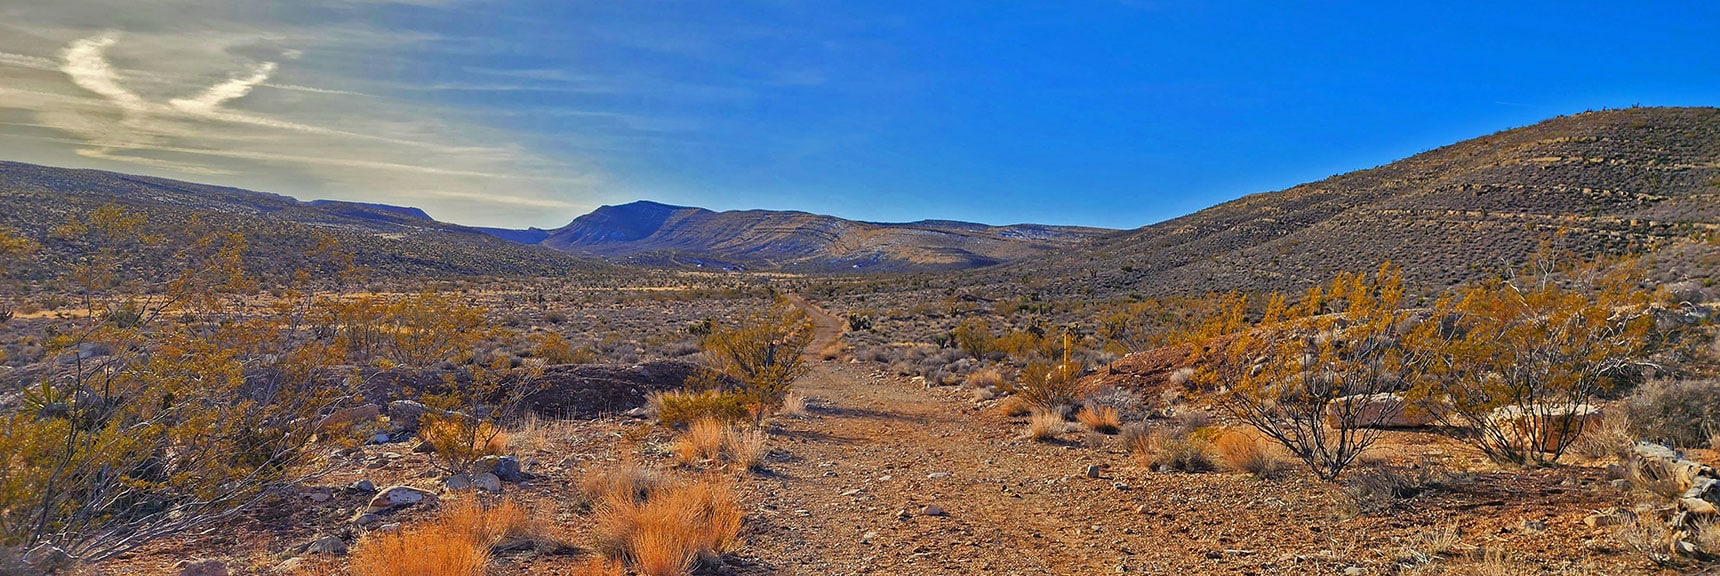 View South. Ridgeline on the Right is West of Blue Diamond Hill | Western Outer Circuit | Blue Diamond Hill | Red Rock Canyon, Nevada